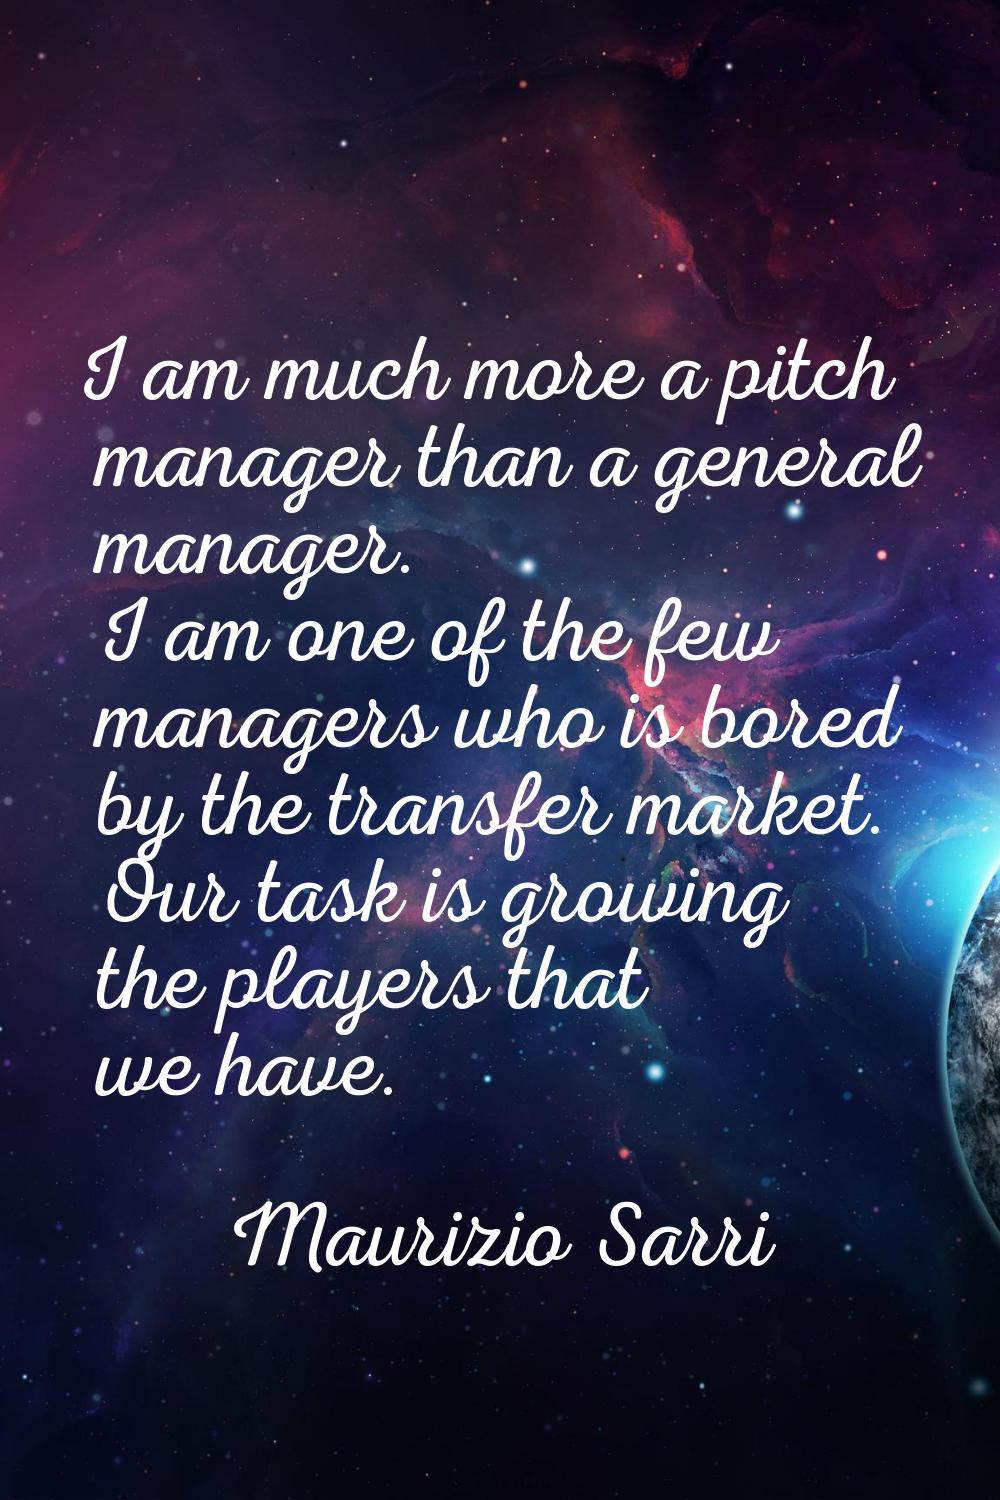 I am much more a pitch manager than a general manager. I am one of the few managers who is bored by